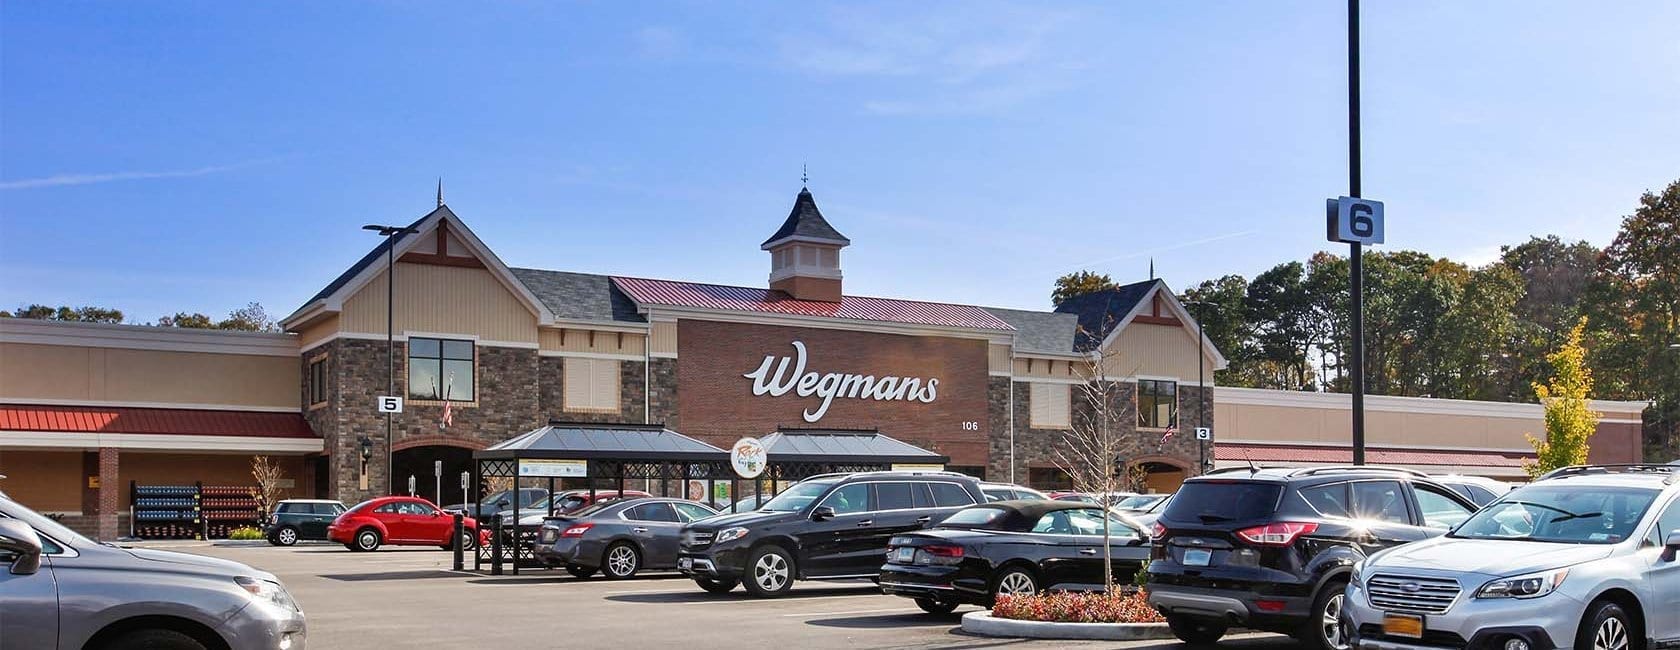 Wegman's flagship store is a two-minute walk down the road from Carraway luxury apartment homes.